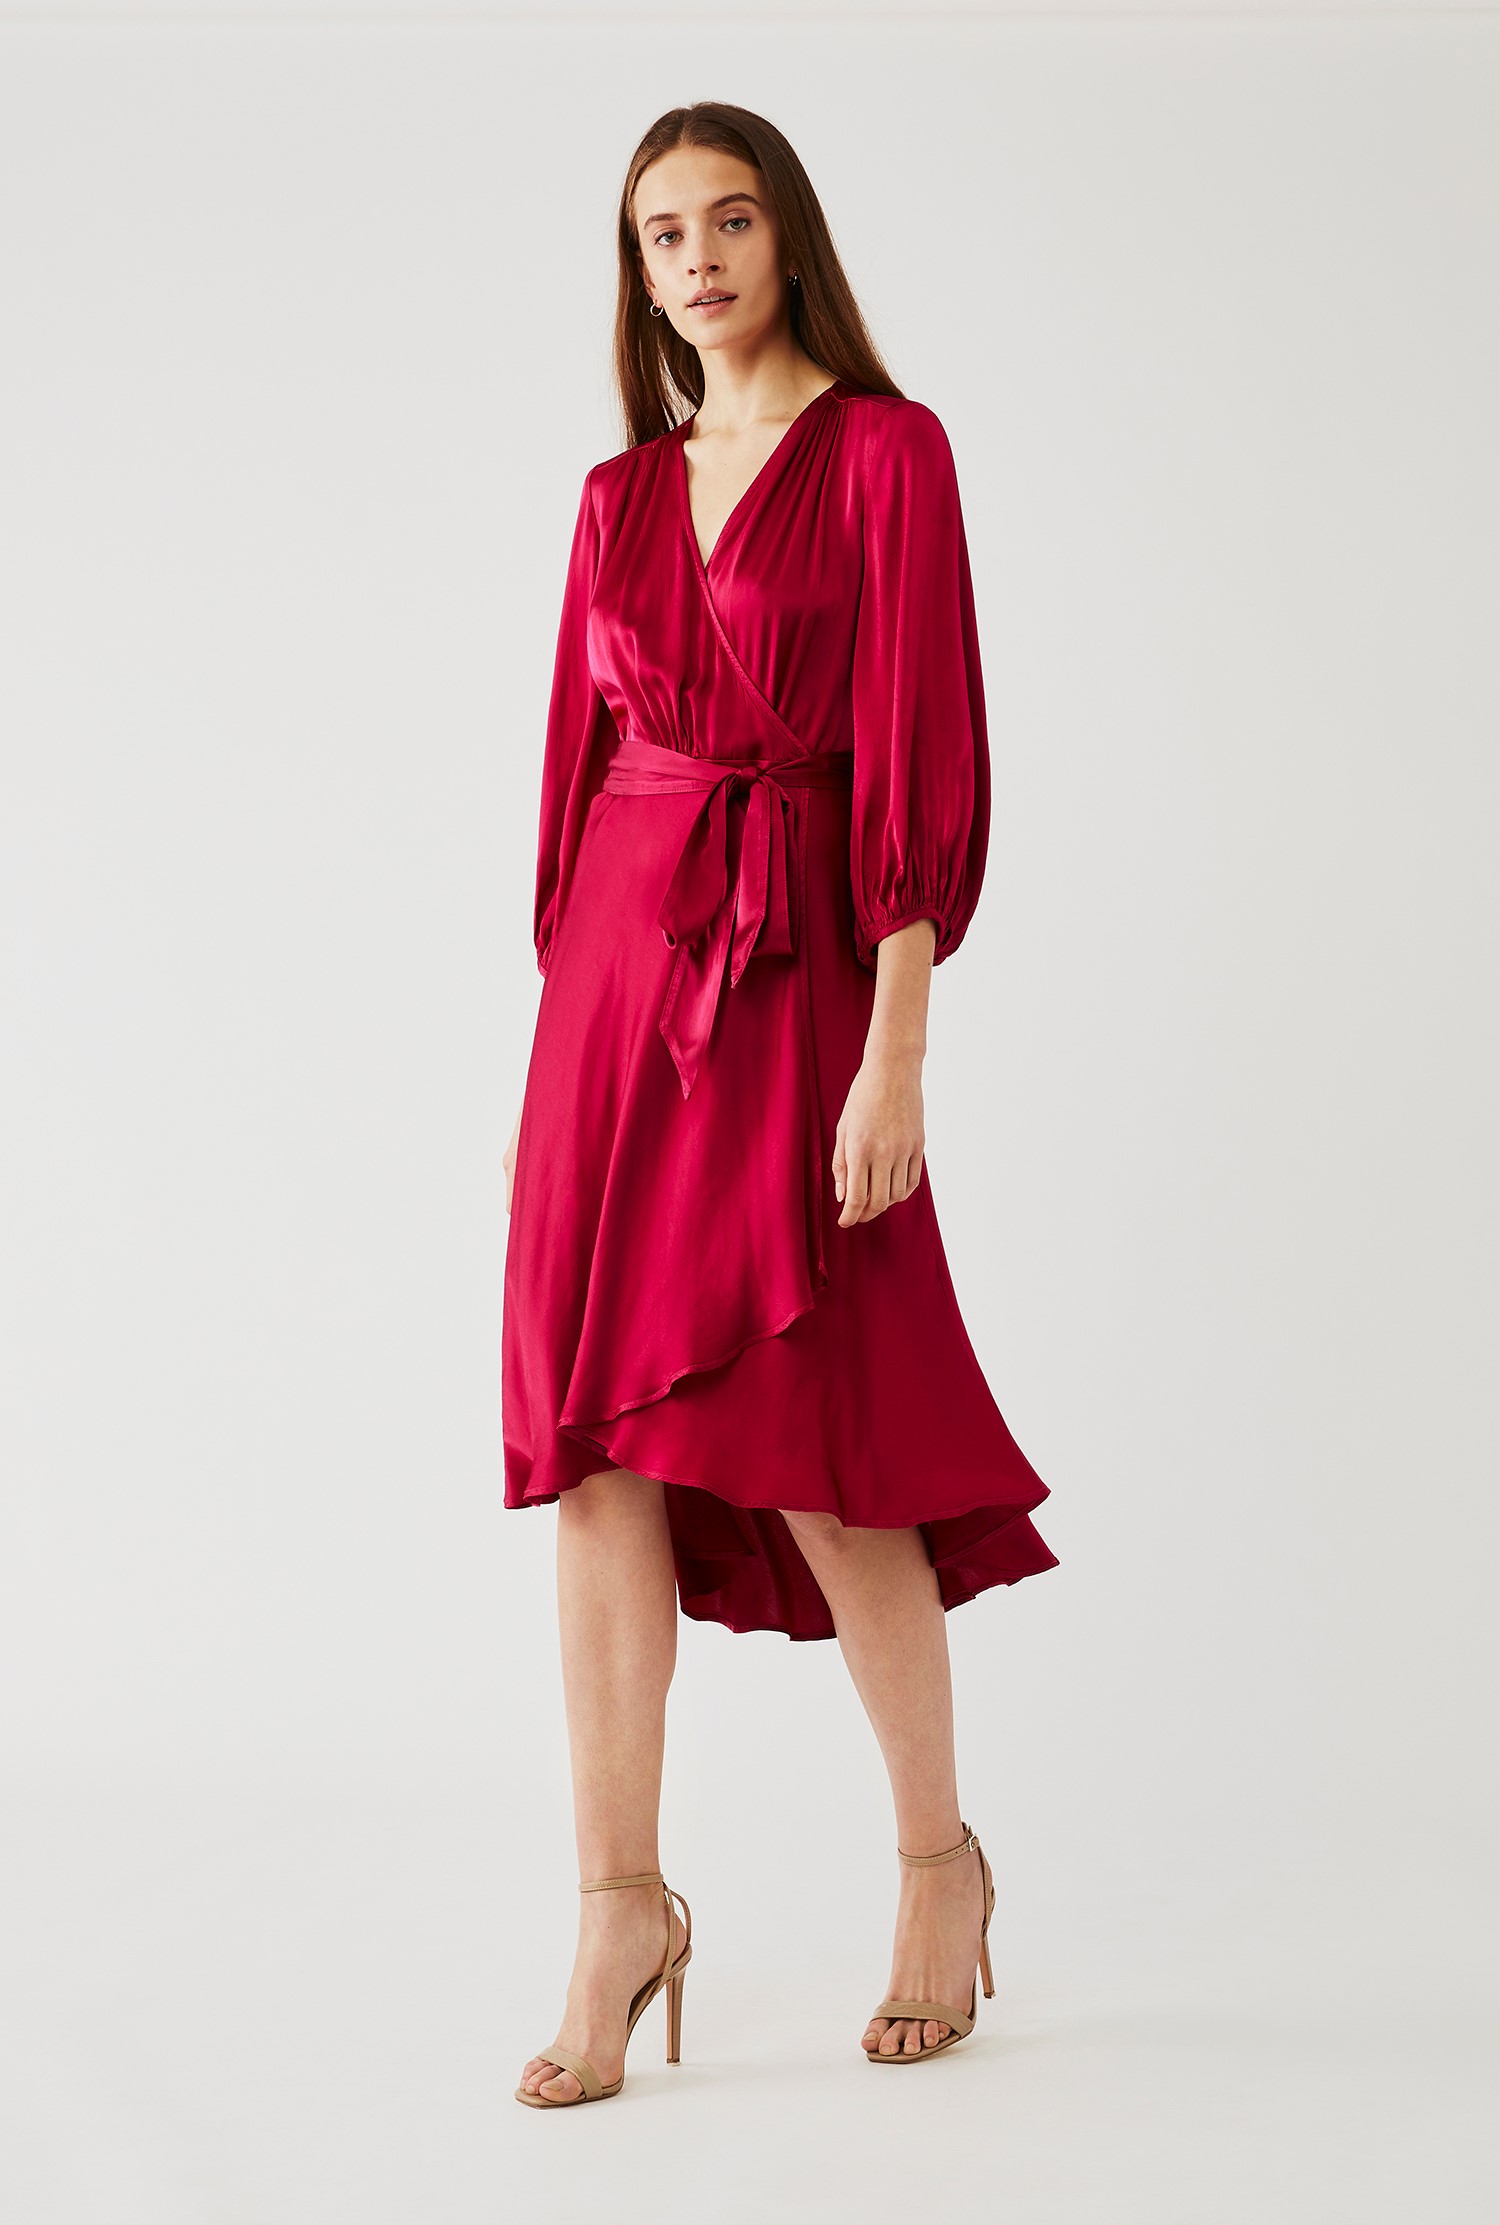 Aggie Berry Satin Wrap Dress with Sleeves | Ghost London